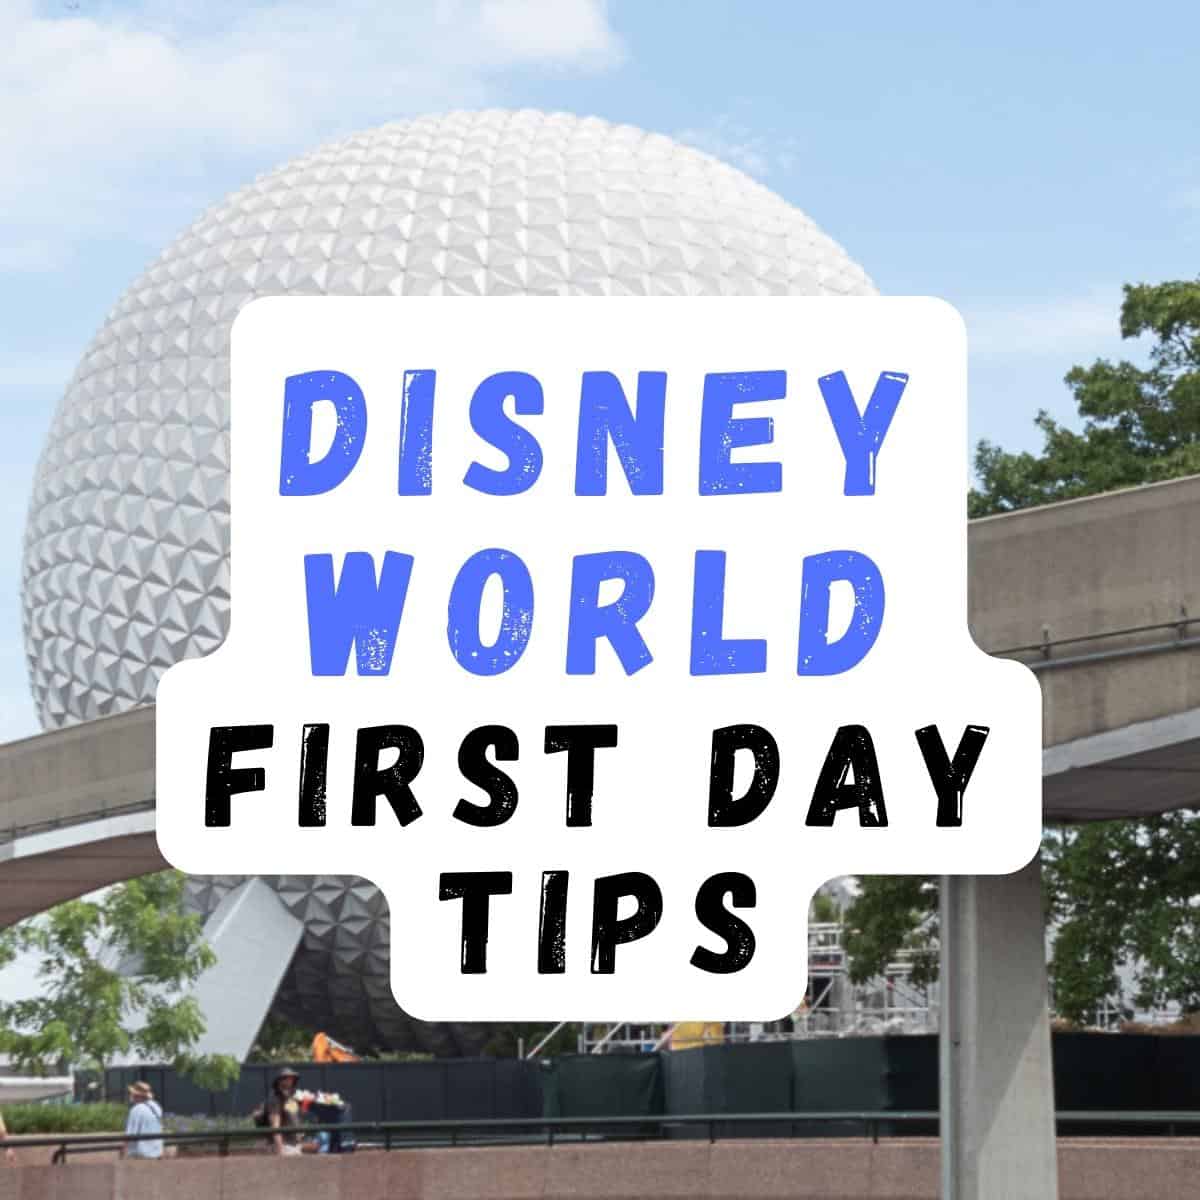 First Day At Disney World text overlay on vacation image